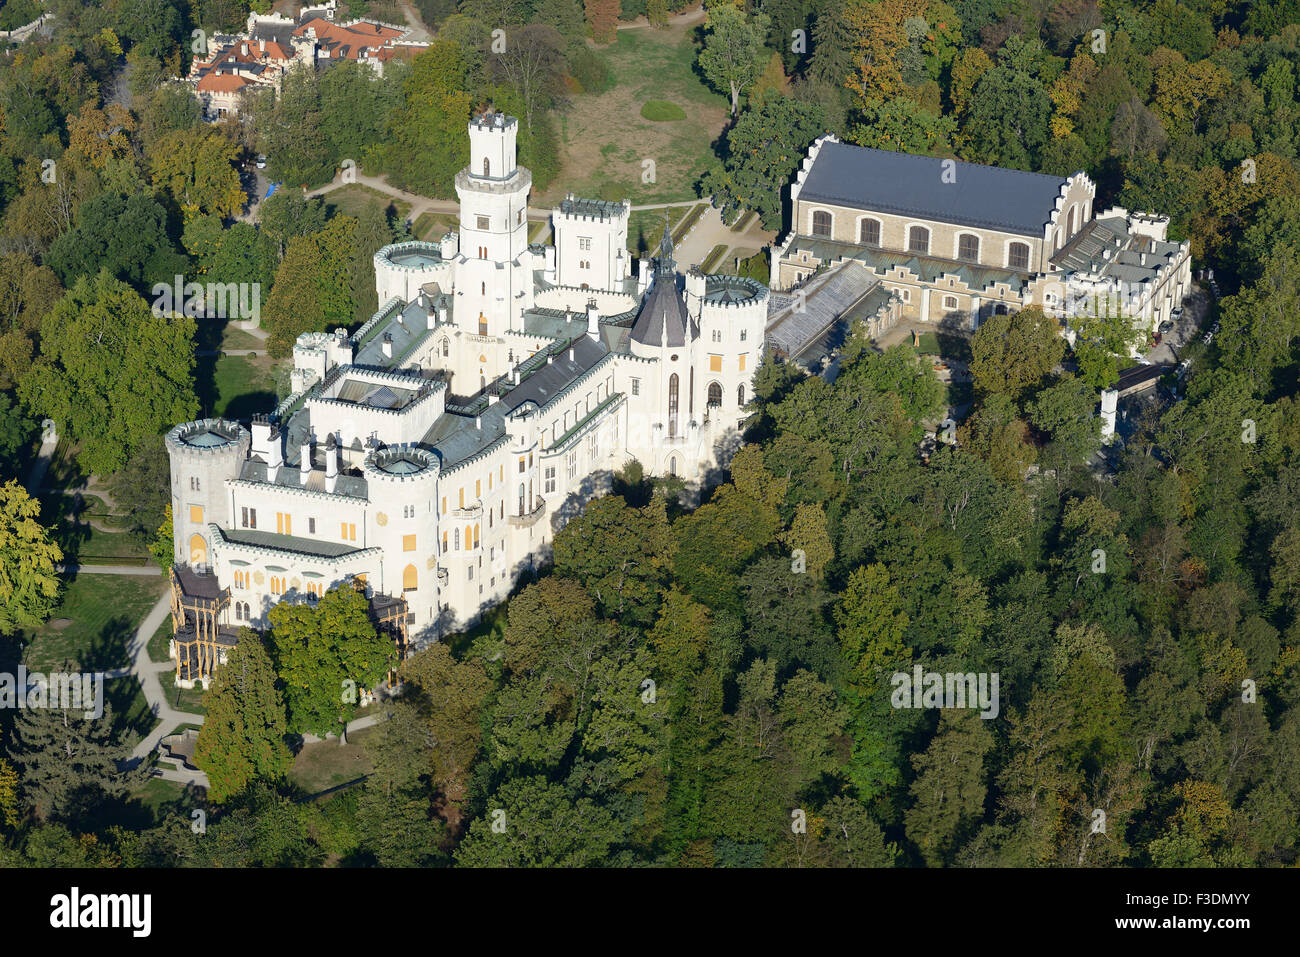 AERIAL VIEW. Hluboká Castle and its surrounding of many trees. Hluboká Nad Vltavou, Bohemia, Czech Republic. Stock Photo